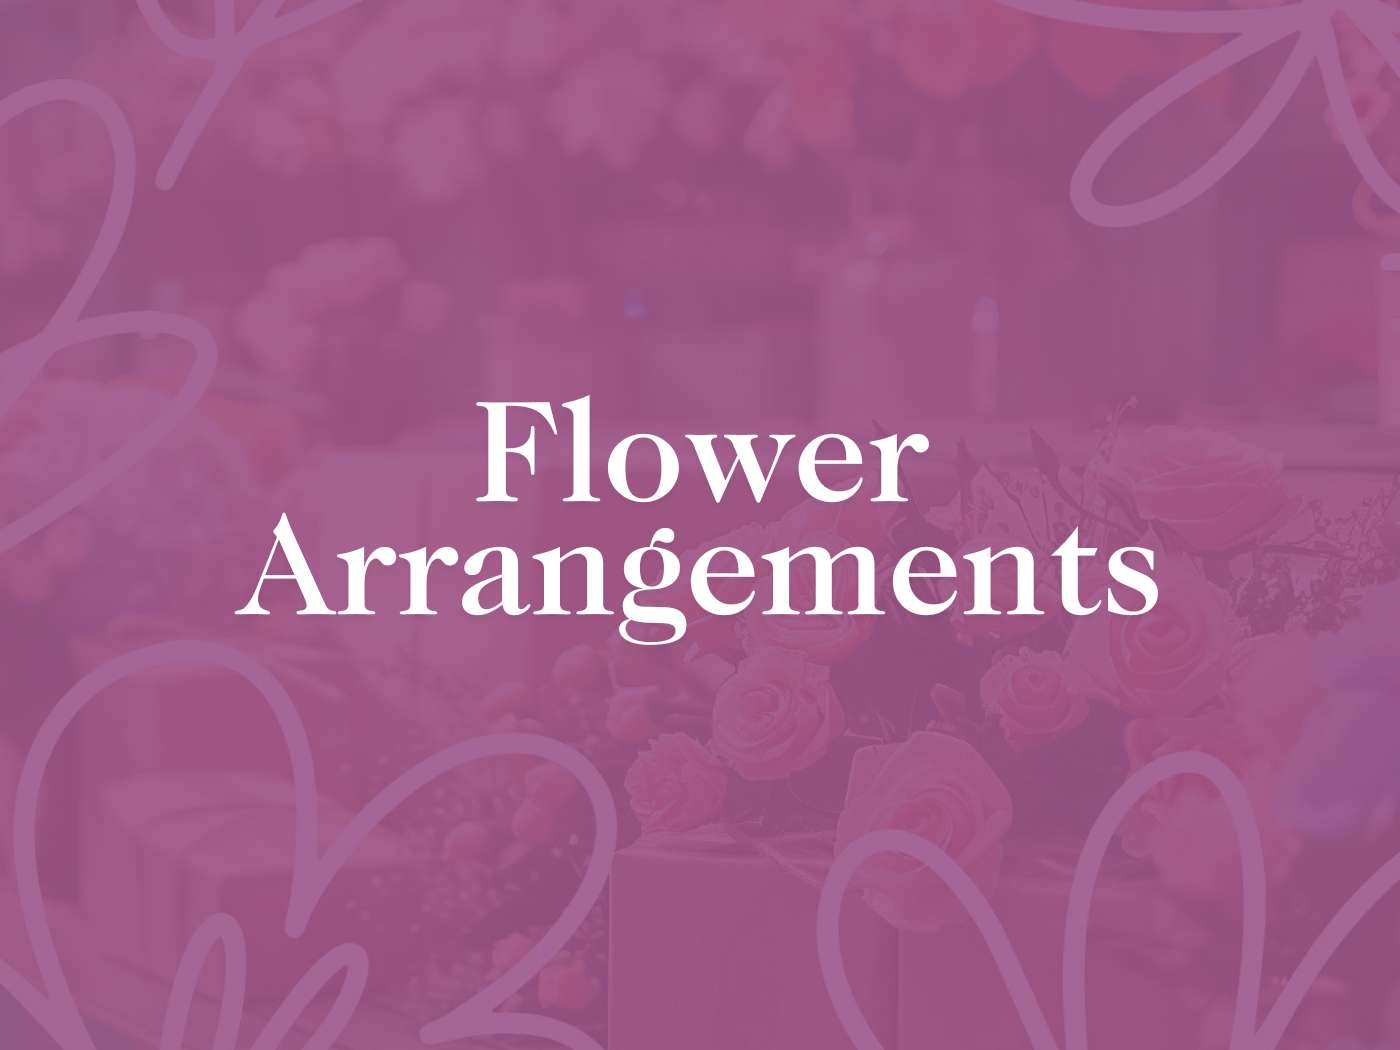 Elegant text overlay 'Flower Arrangements' on a muted purple background with subtle floral patterns, representing Fabulous Flowers and Gifts.